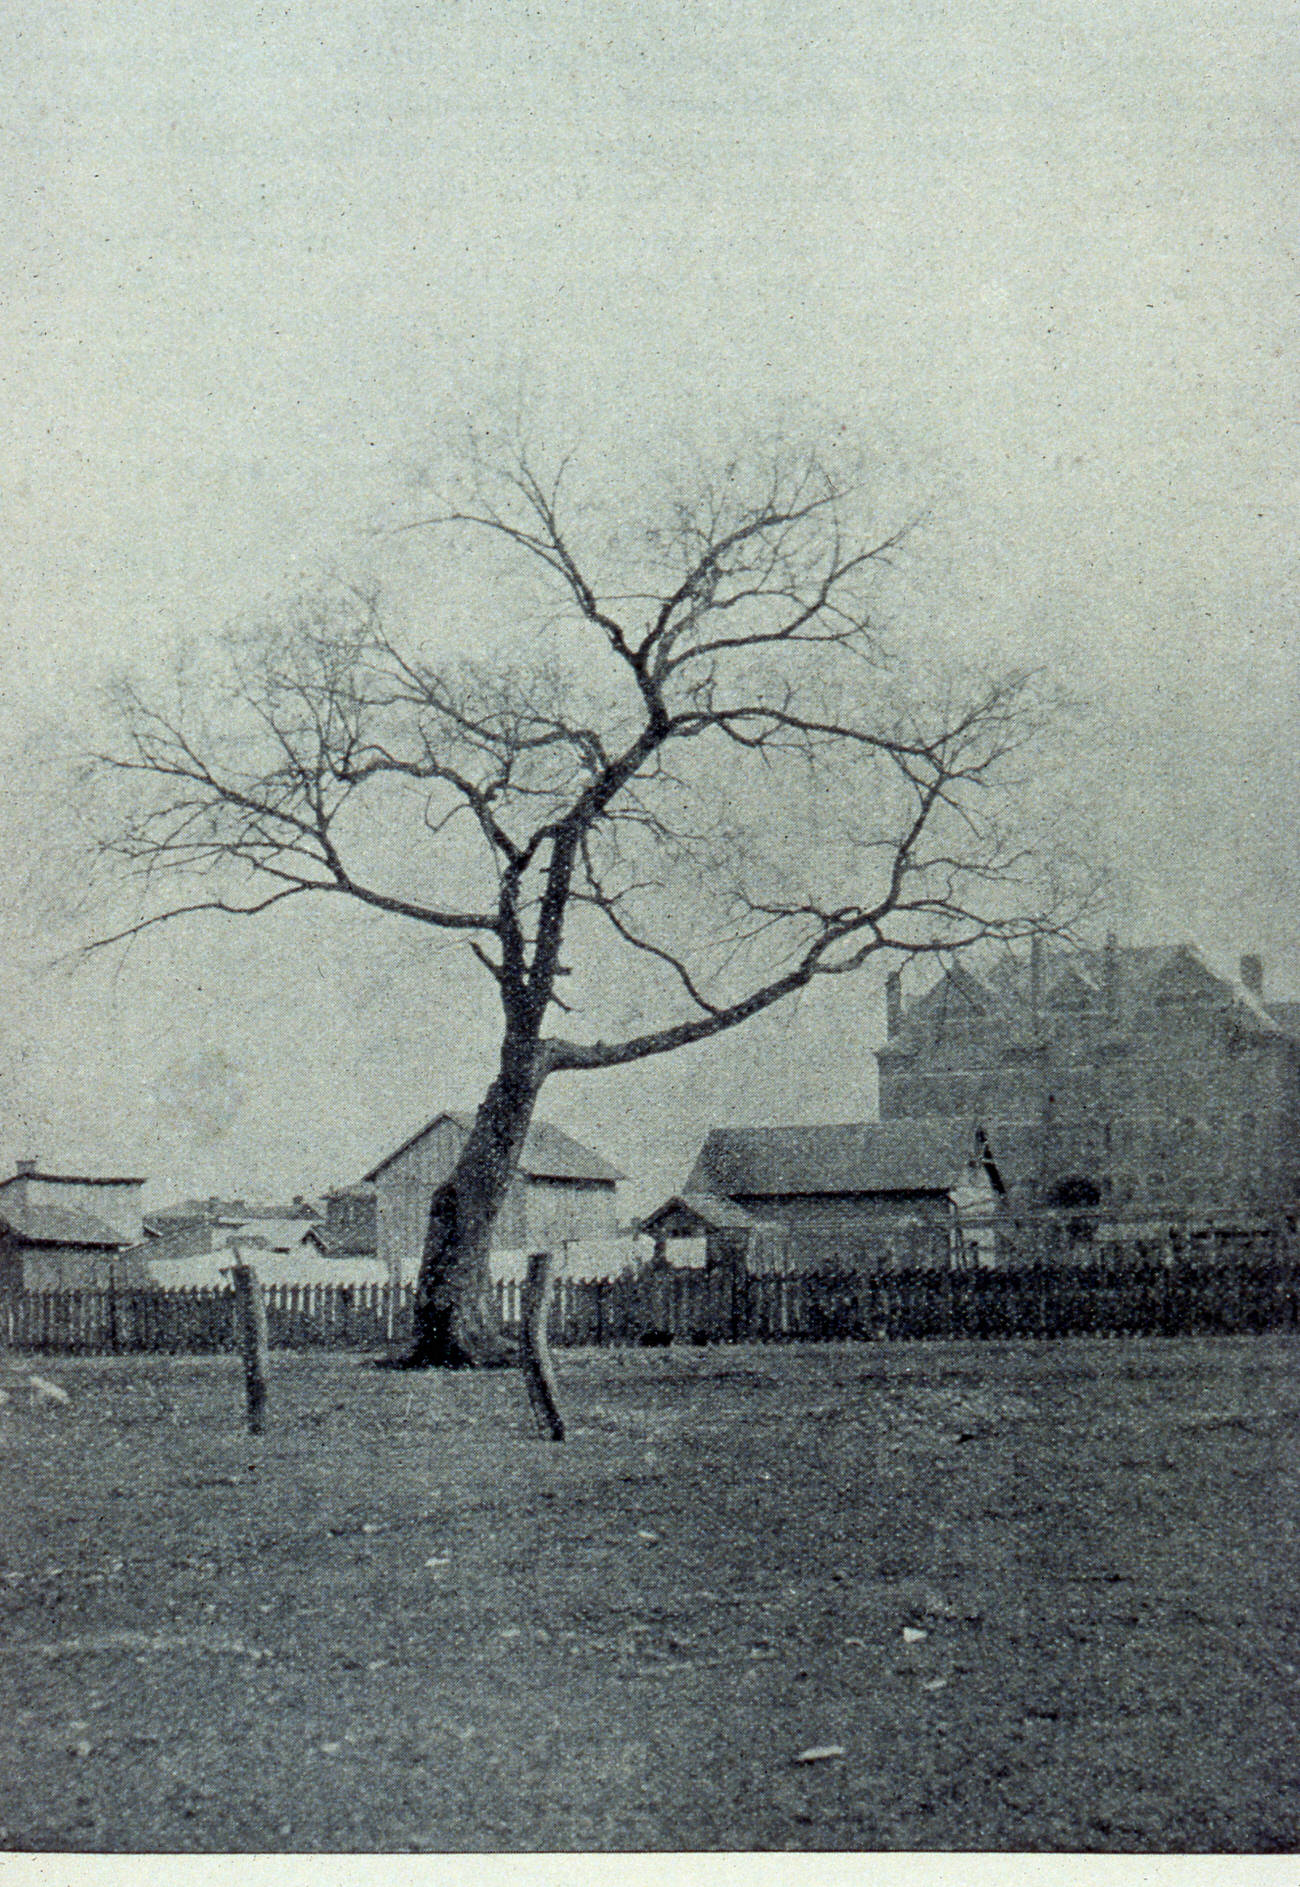 Harrison Elm and former Hawkes Hospital in Franklinton, 1892.